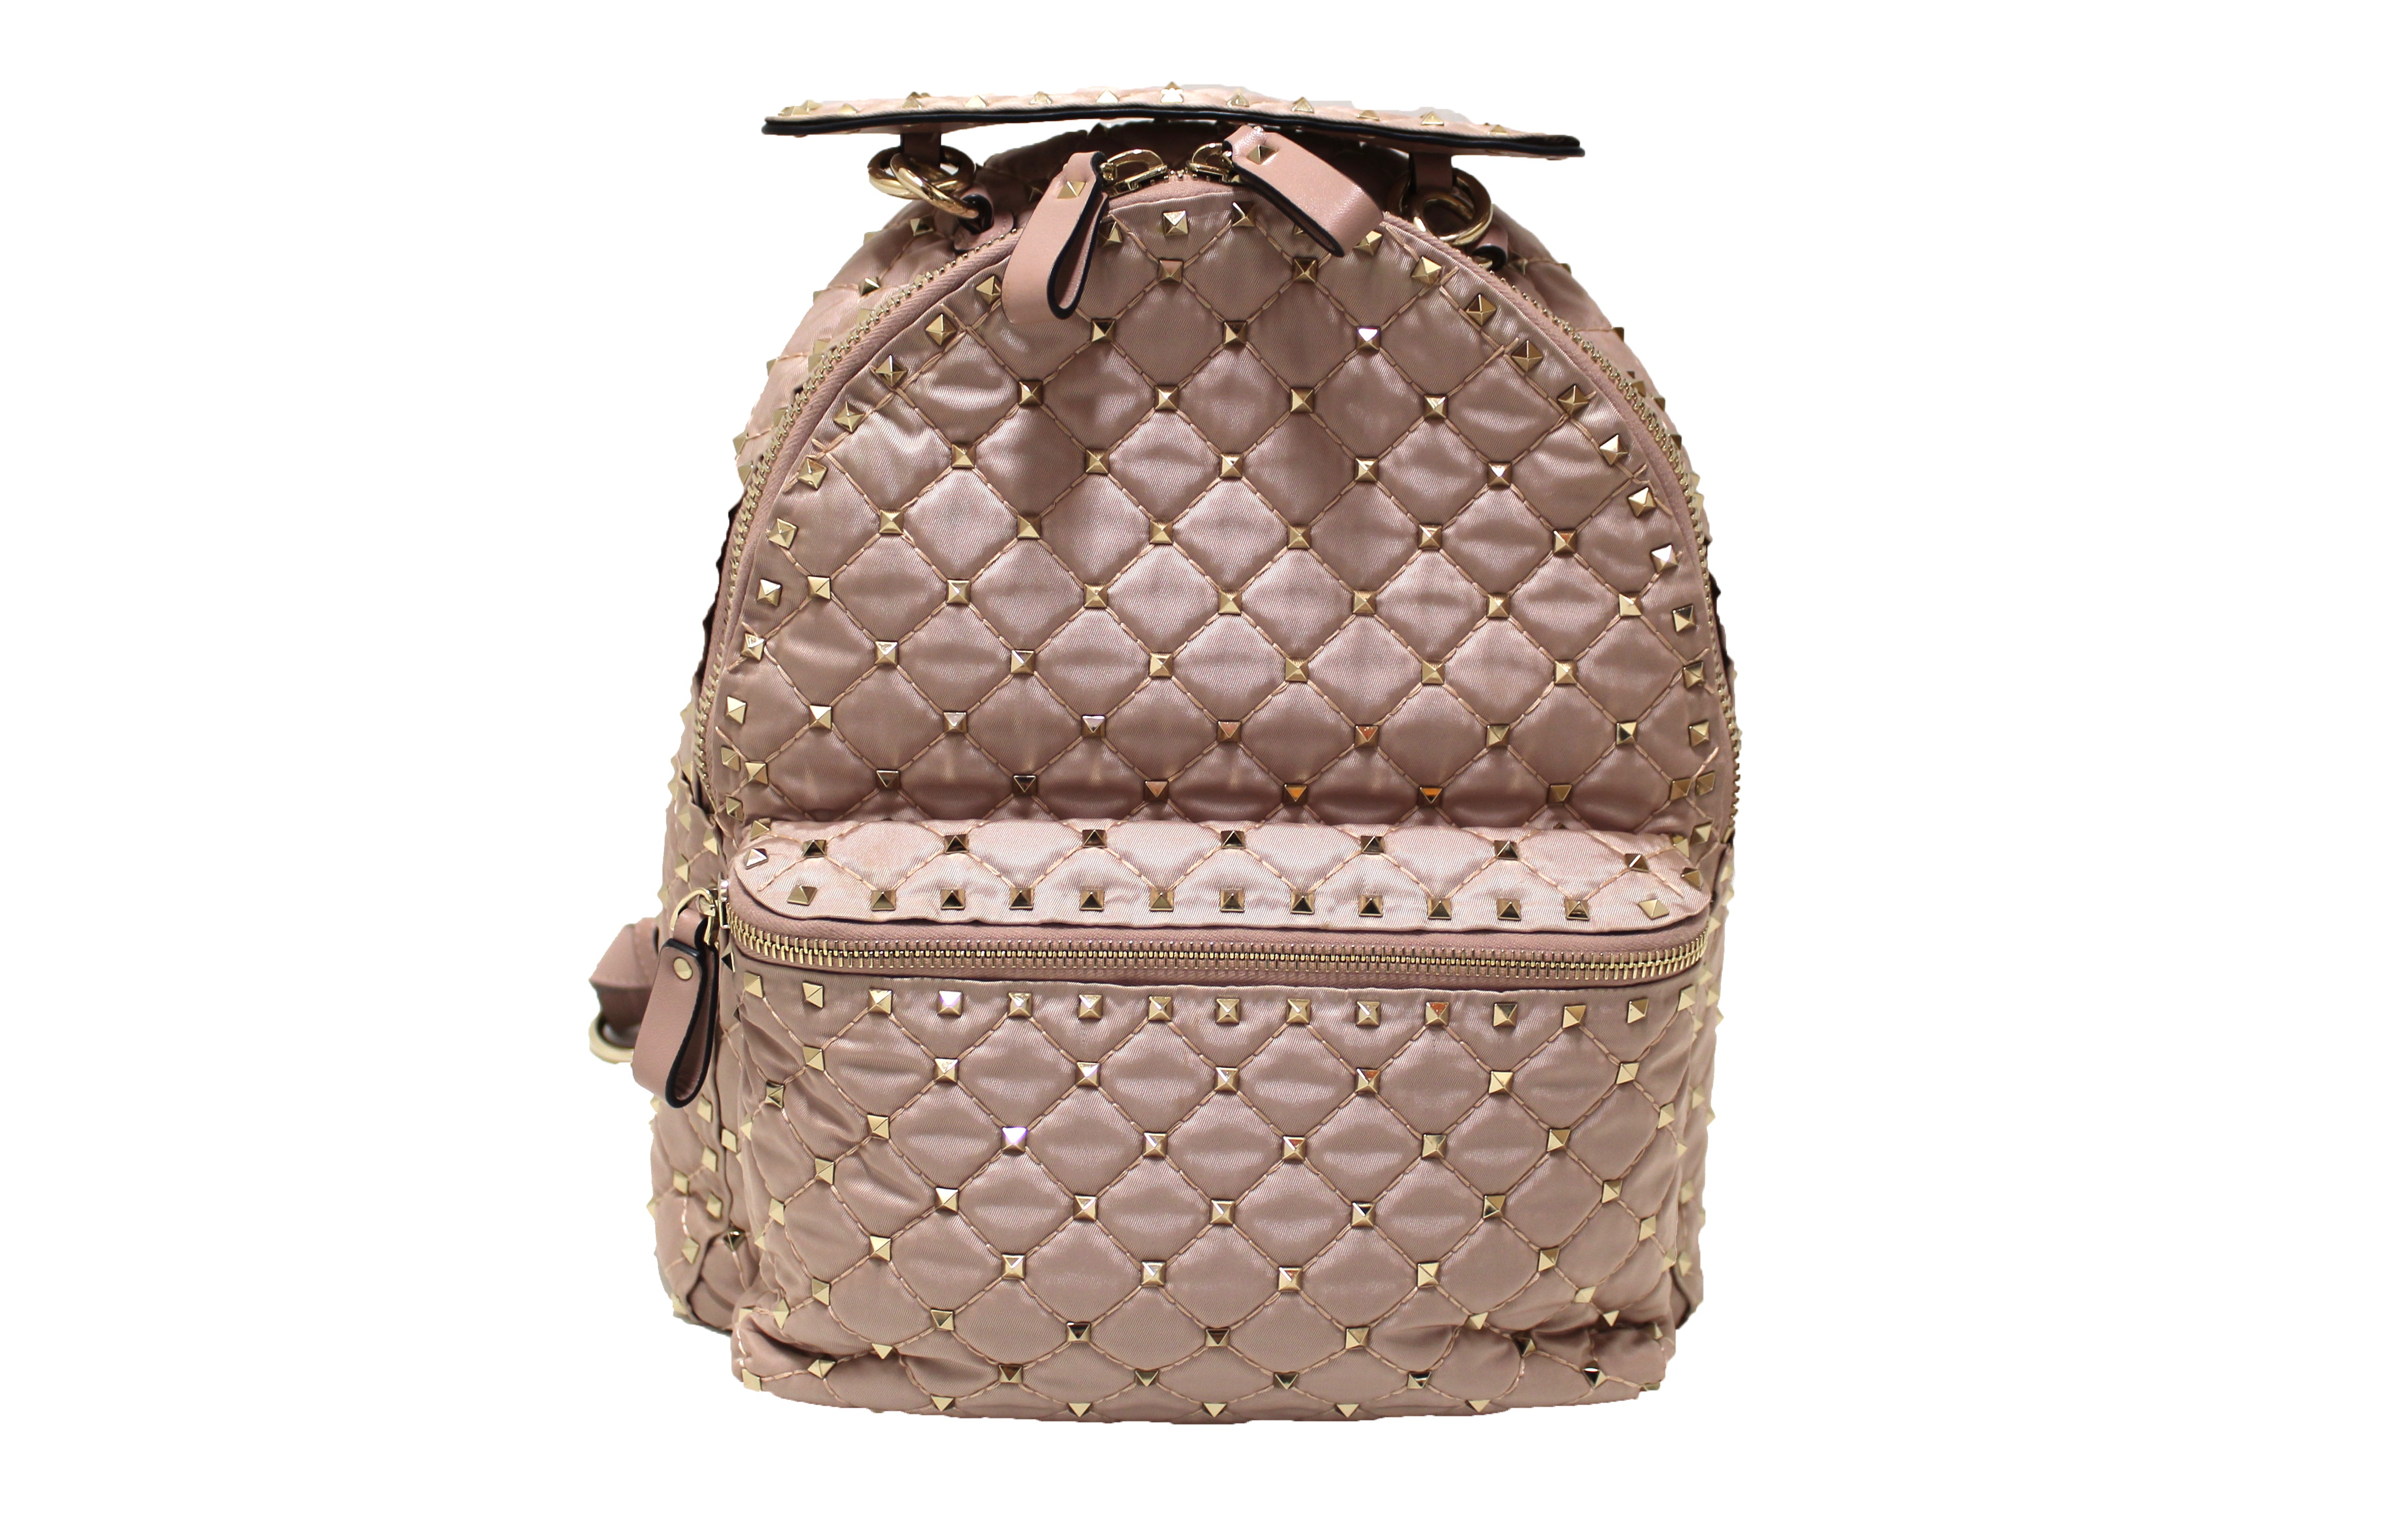 Authentic Valentino Pale Pink Nylon Rockstud Spike Backpack